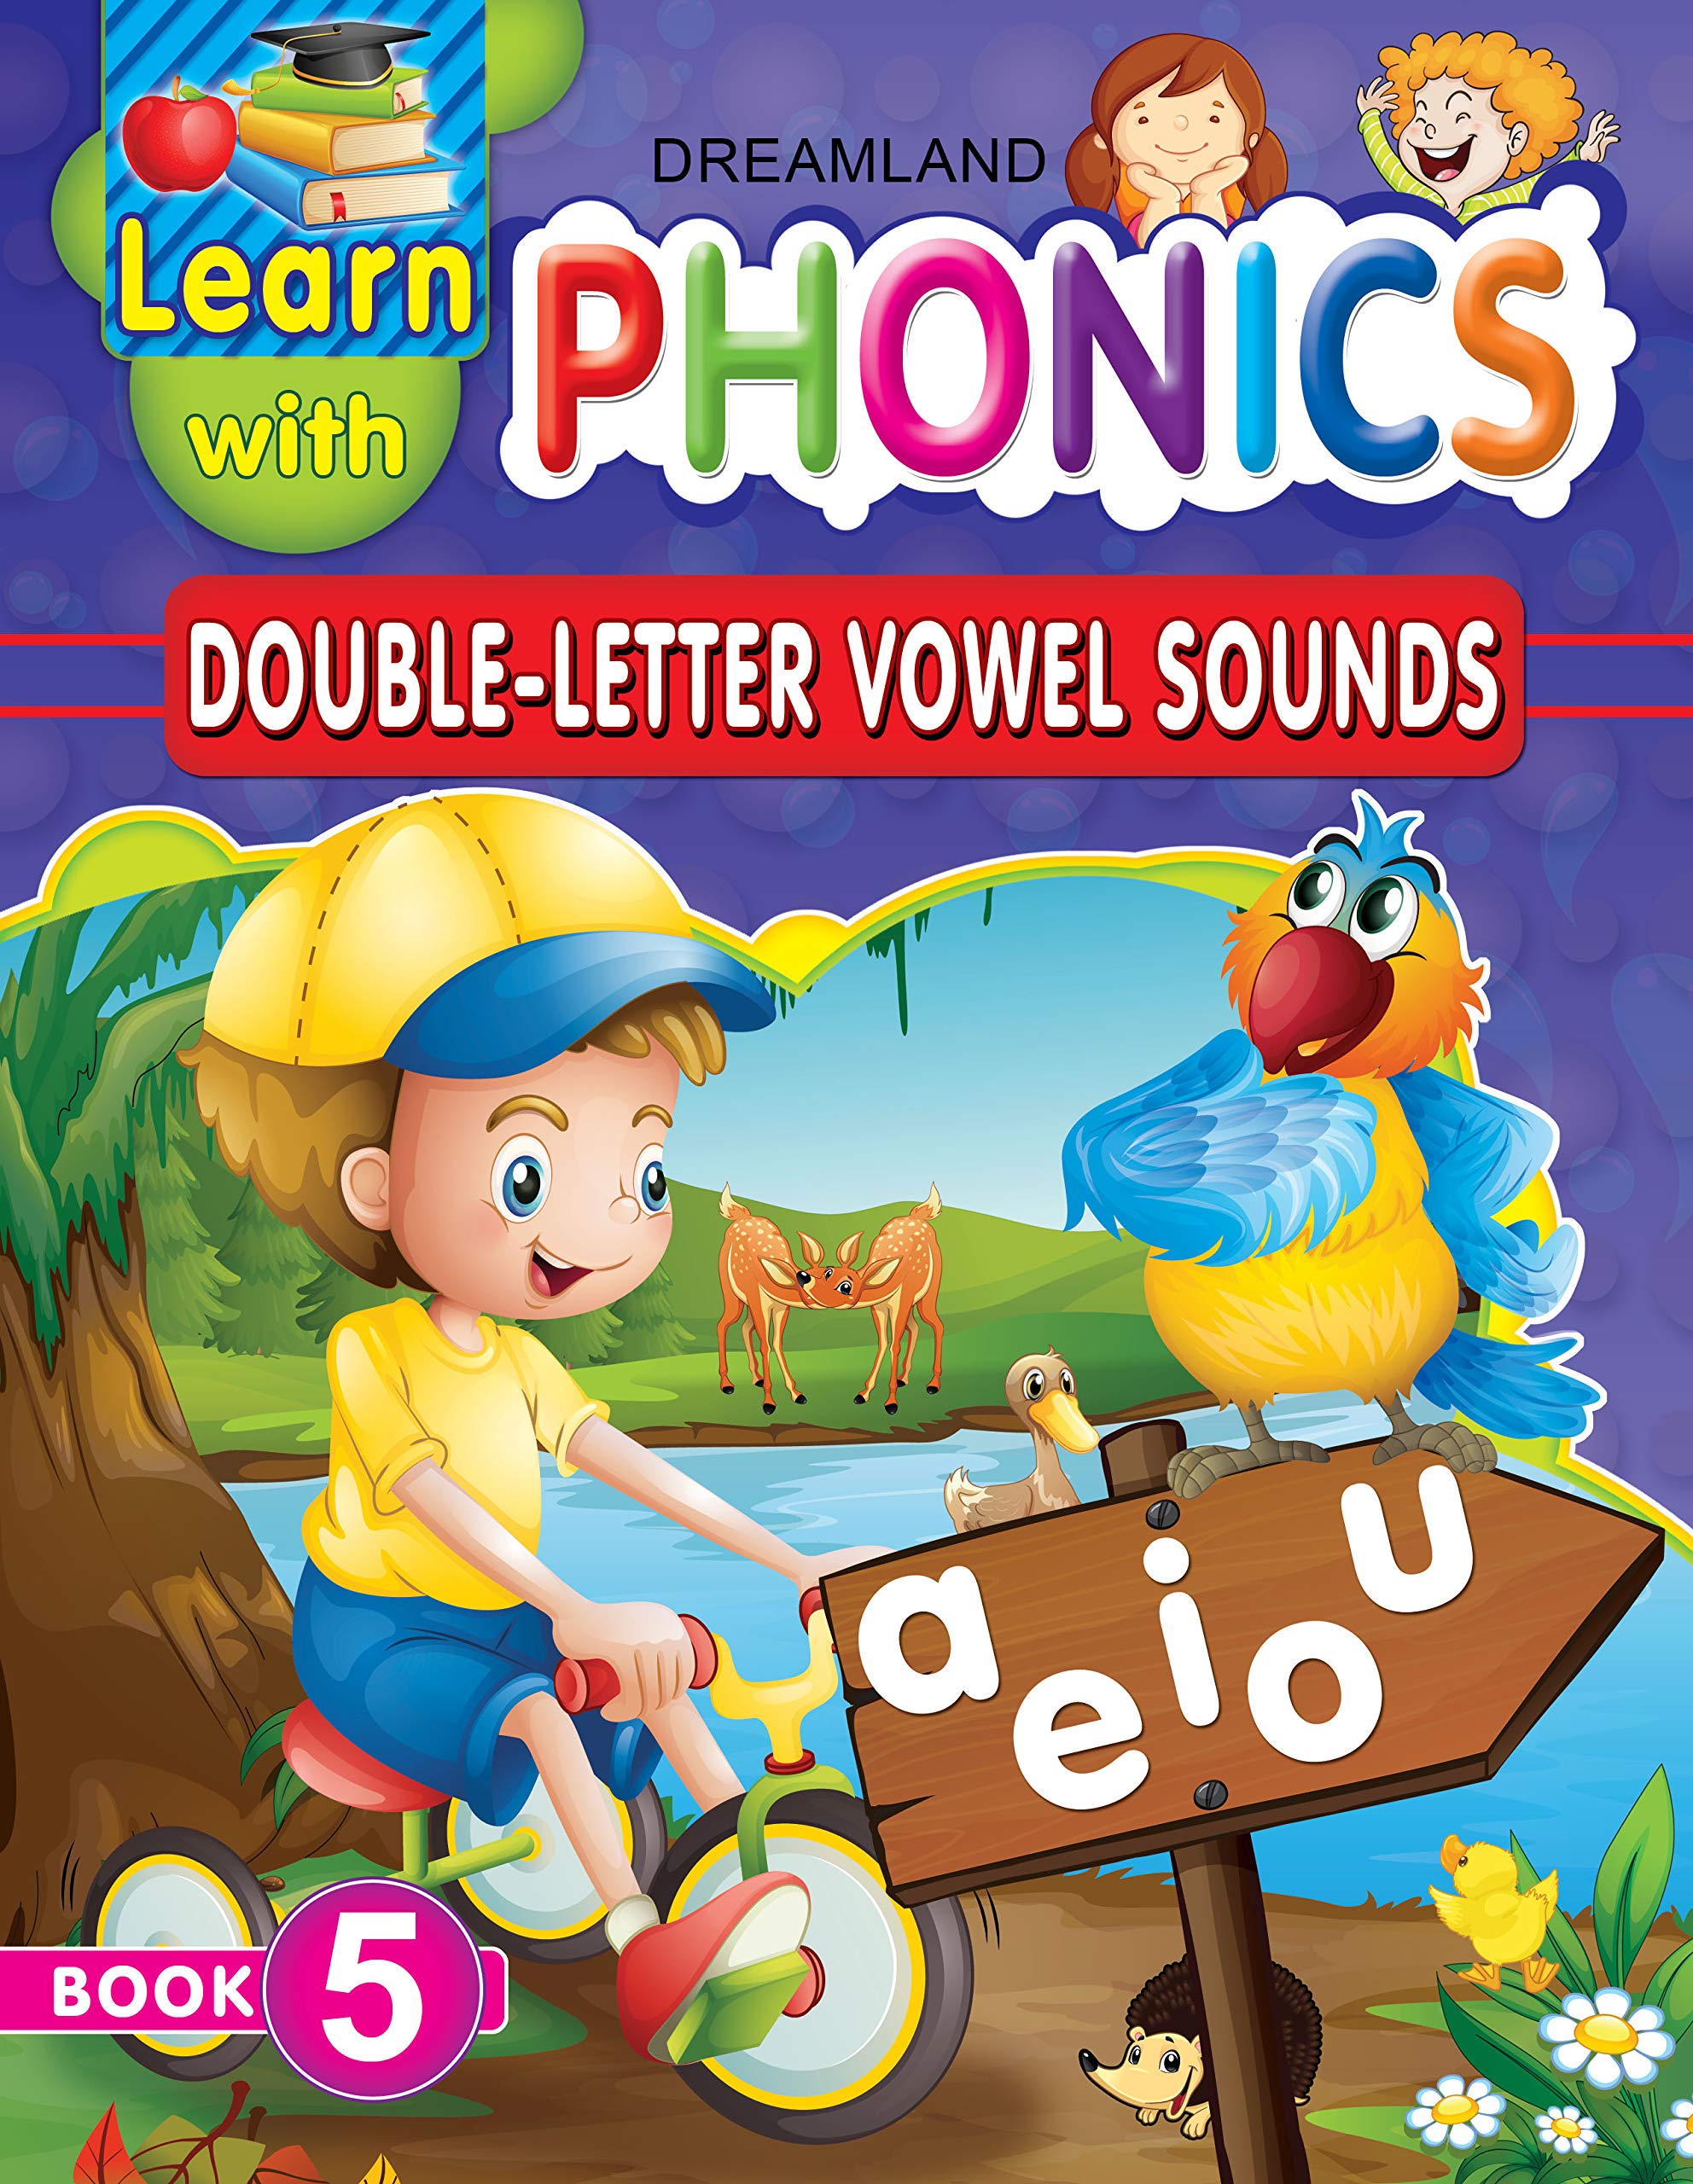 Learn with Phonics (Double-Letter Vowel Sounds)